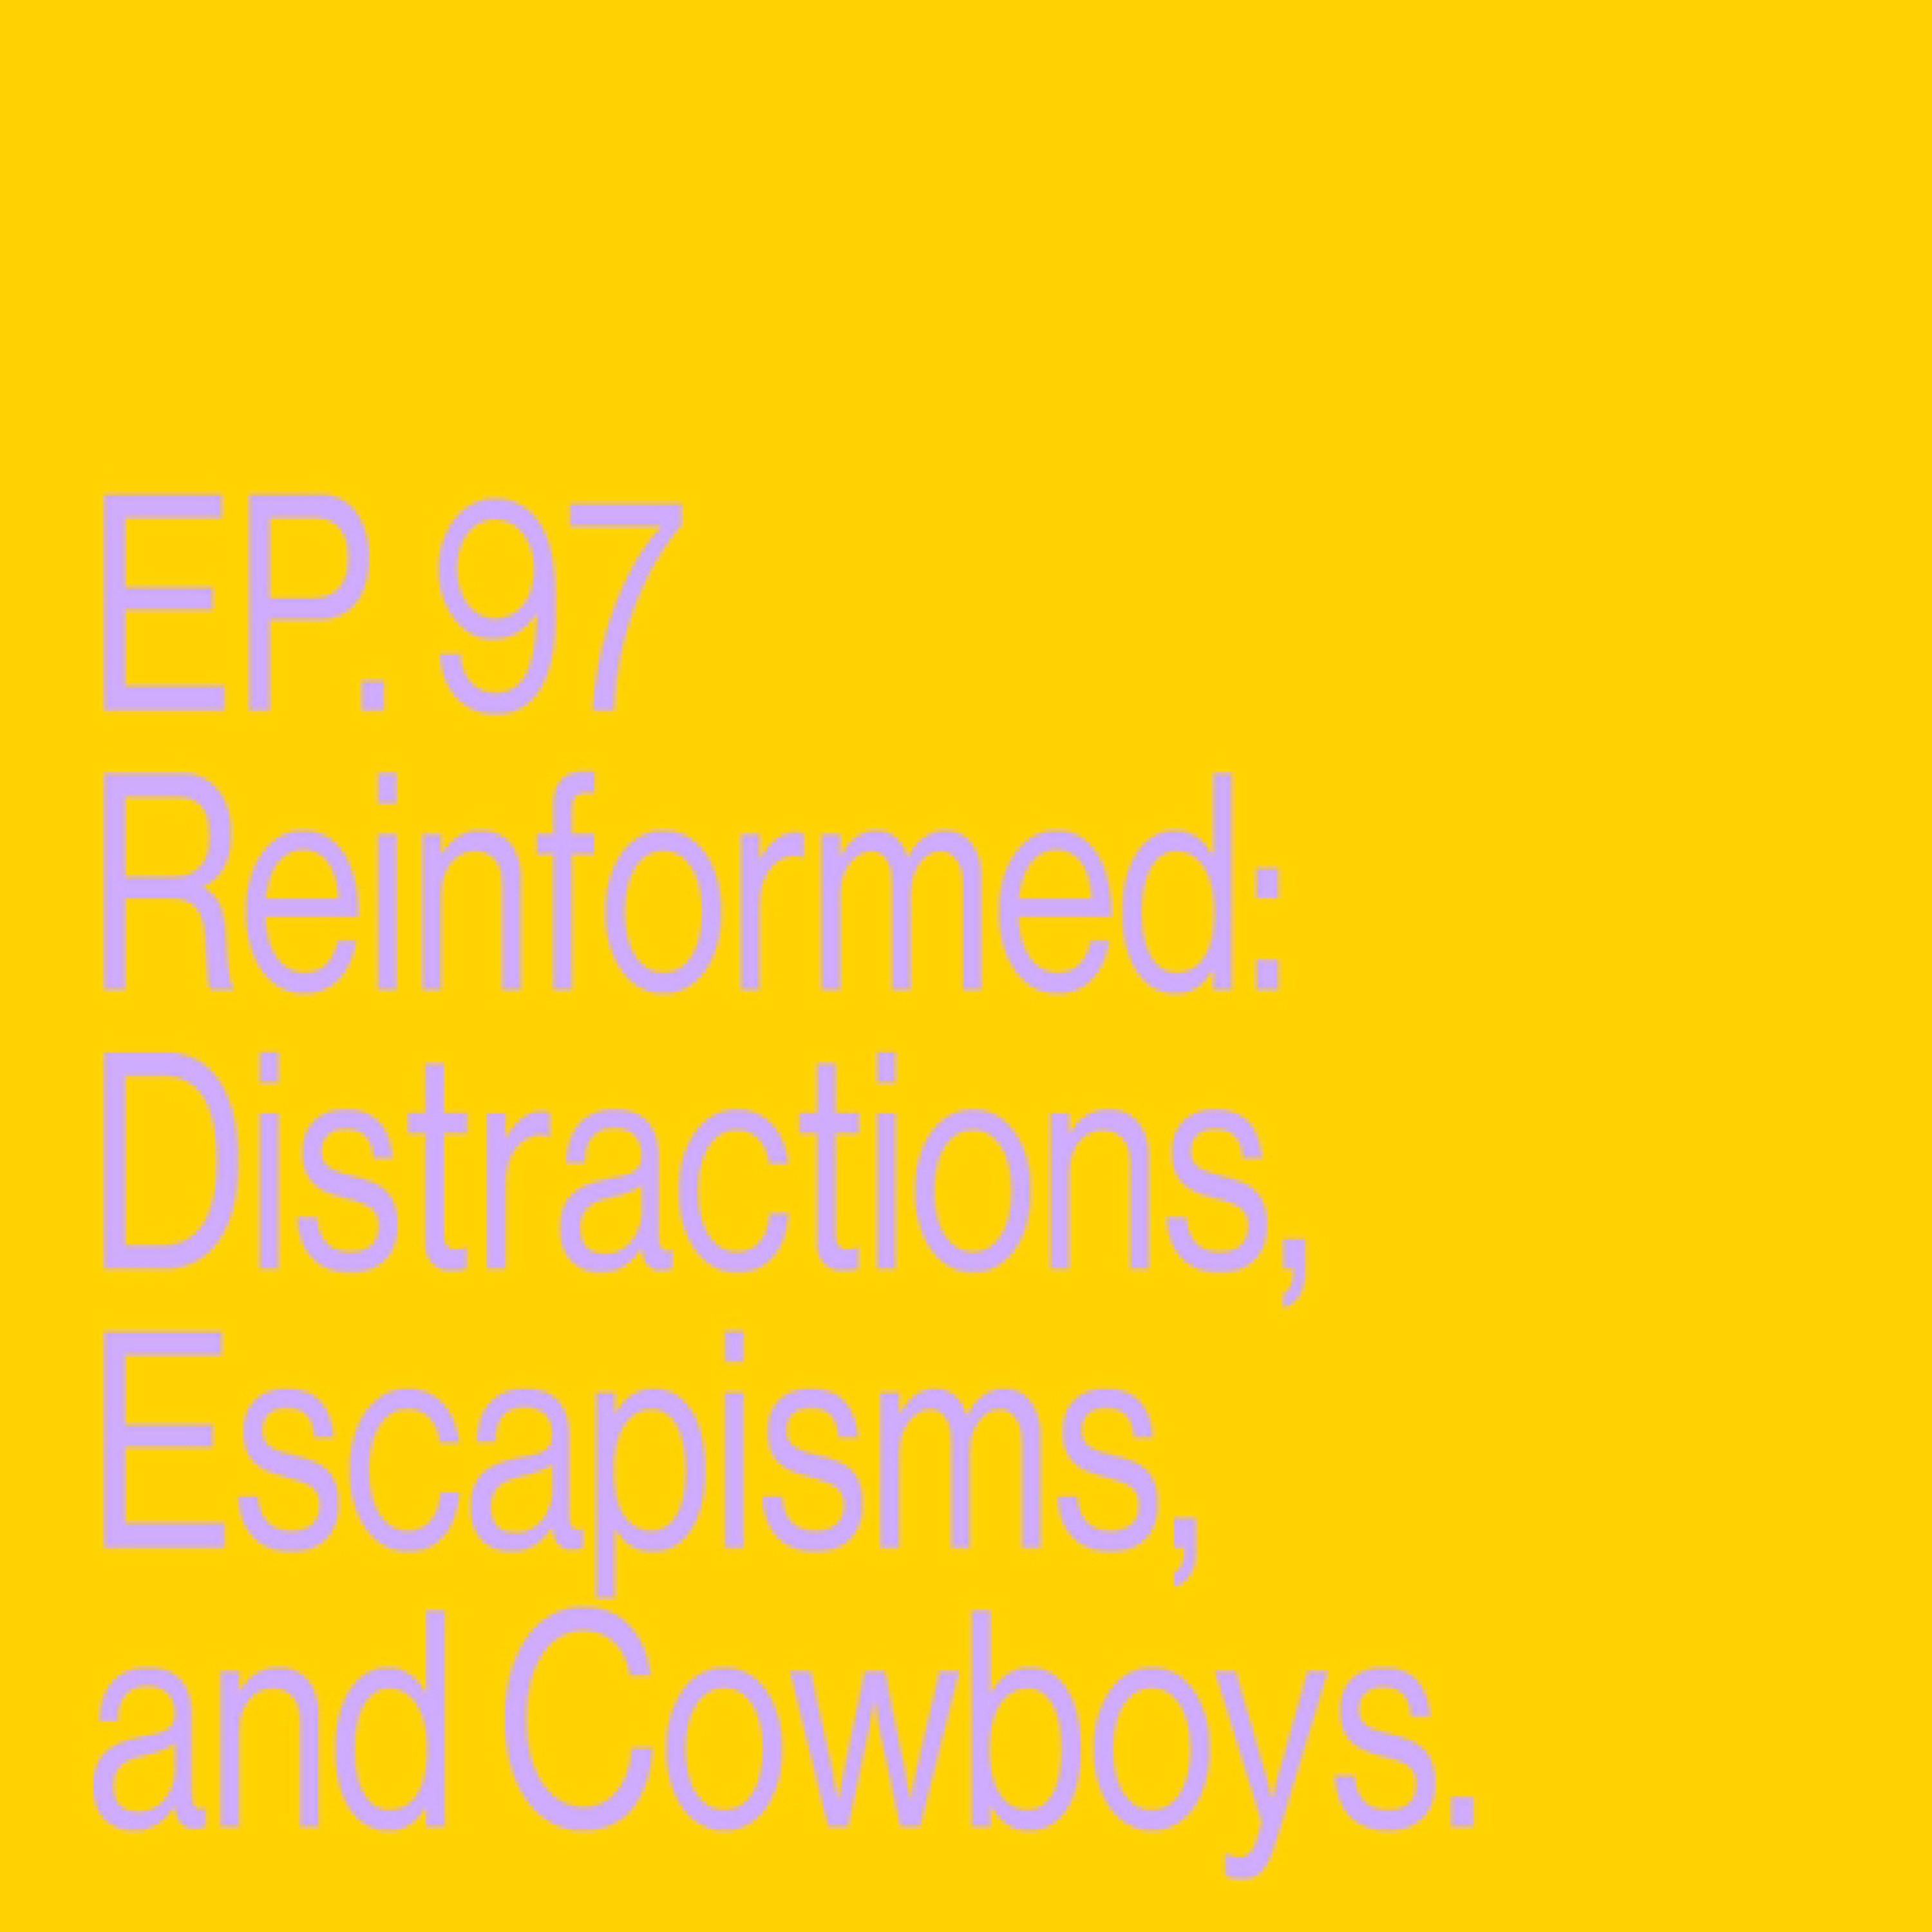 Episode 97: Reinformed - Distractions, Escapisms, and Cowboys